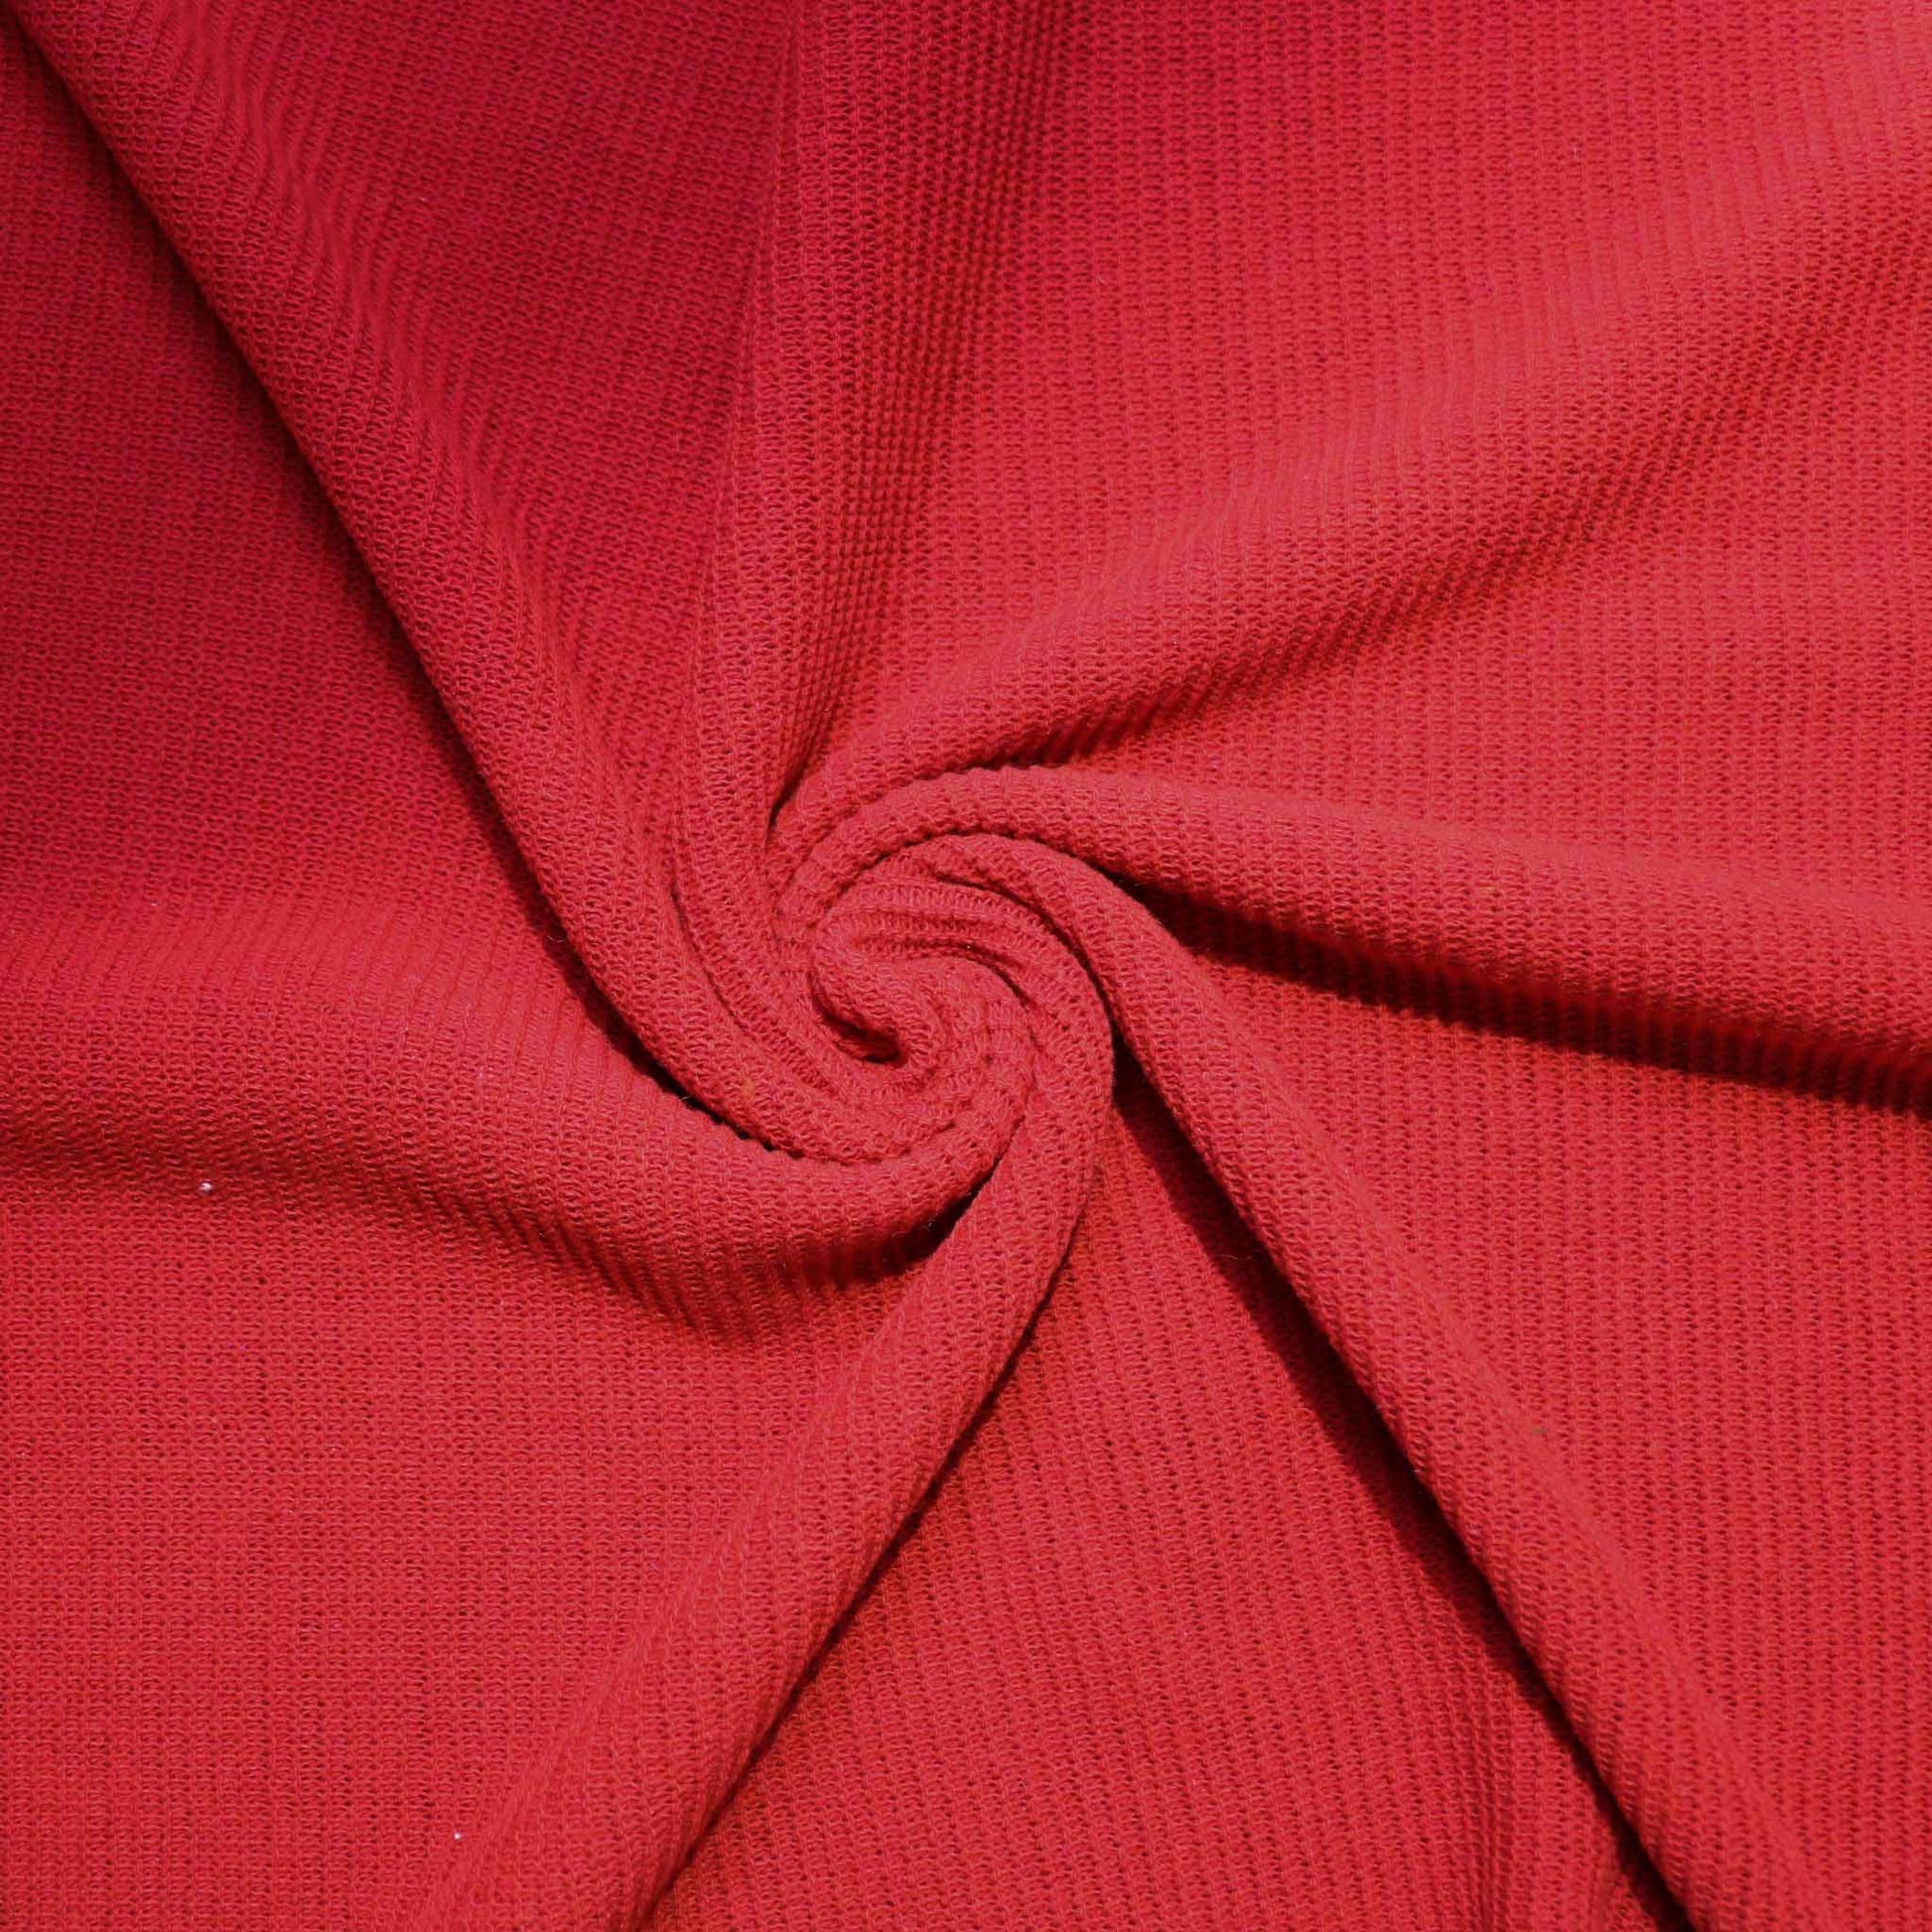 purl knit wool jersey red colour dressmaking fabric